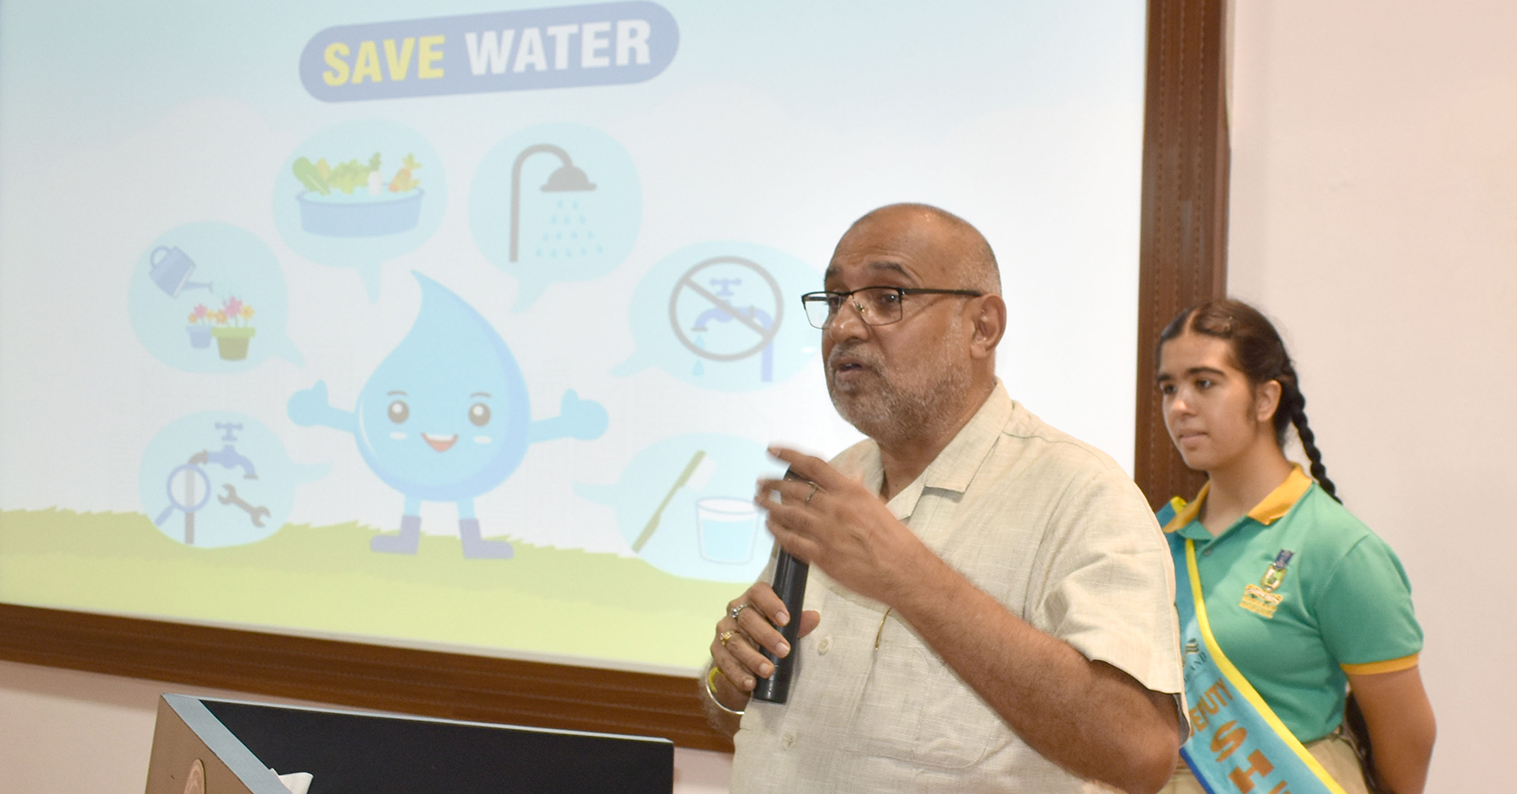 Brain Storming Session On Save Water